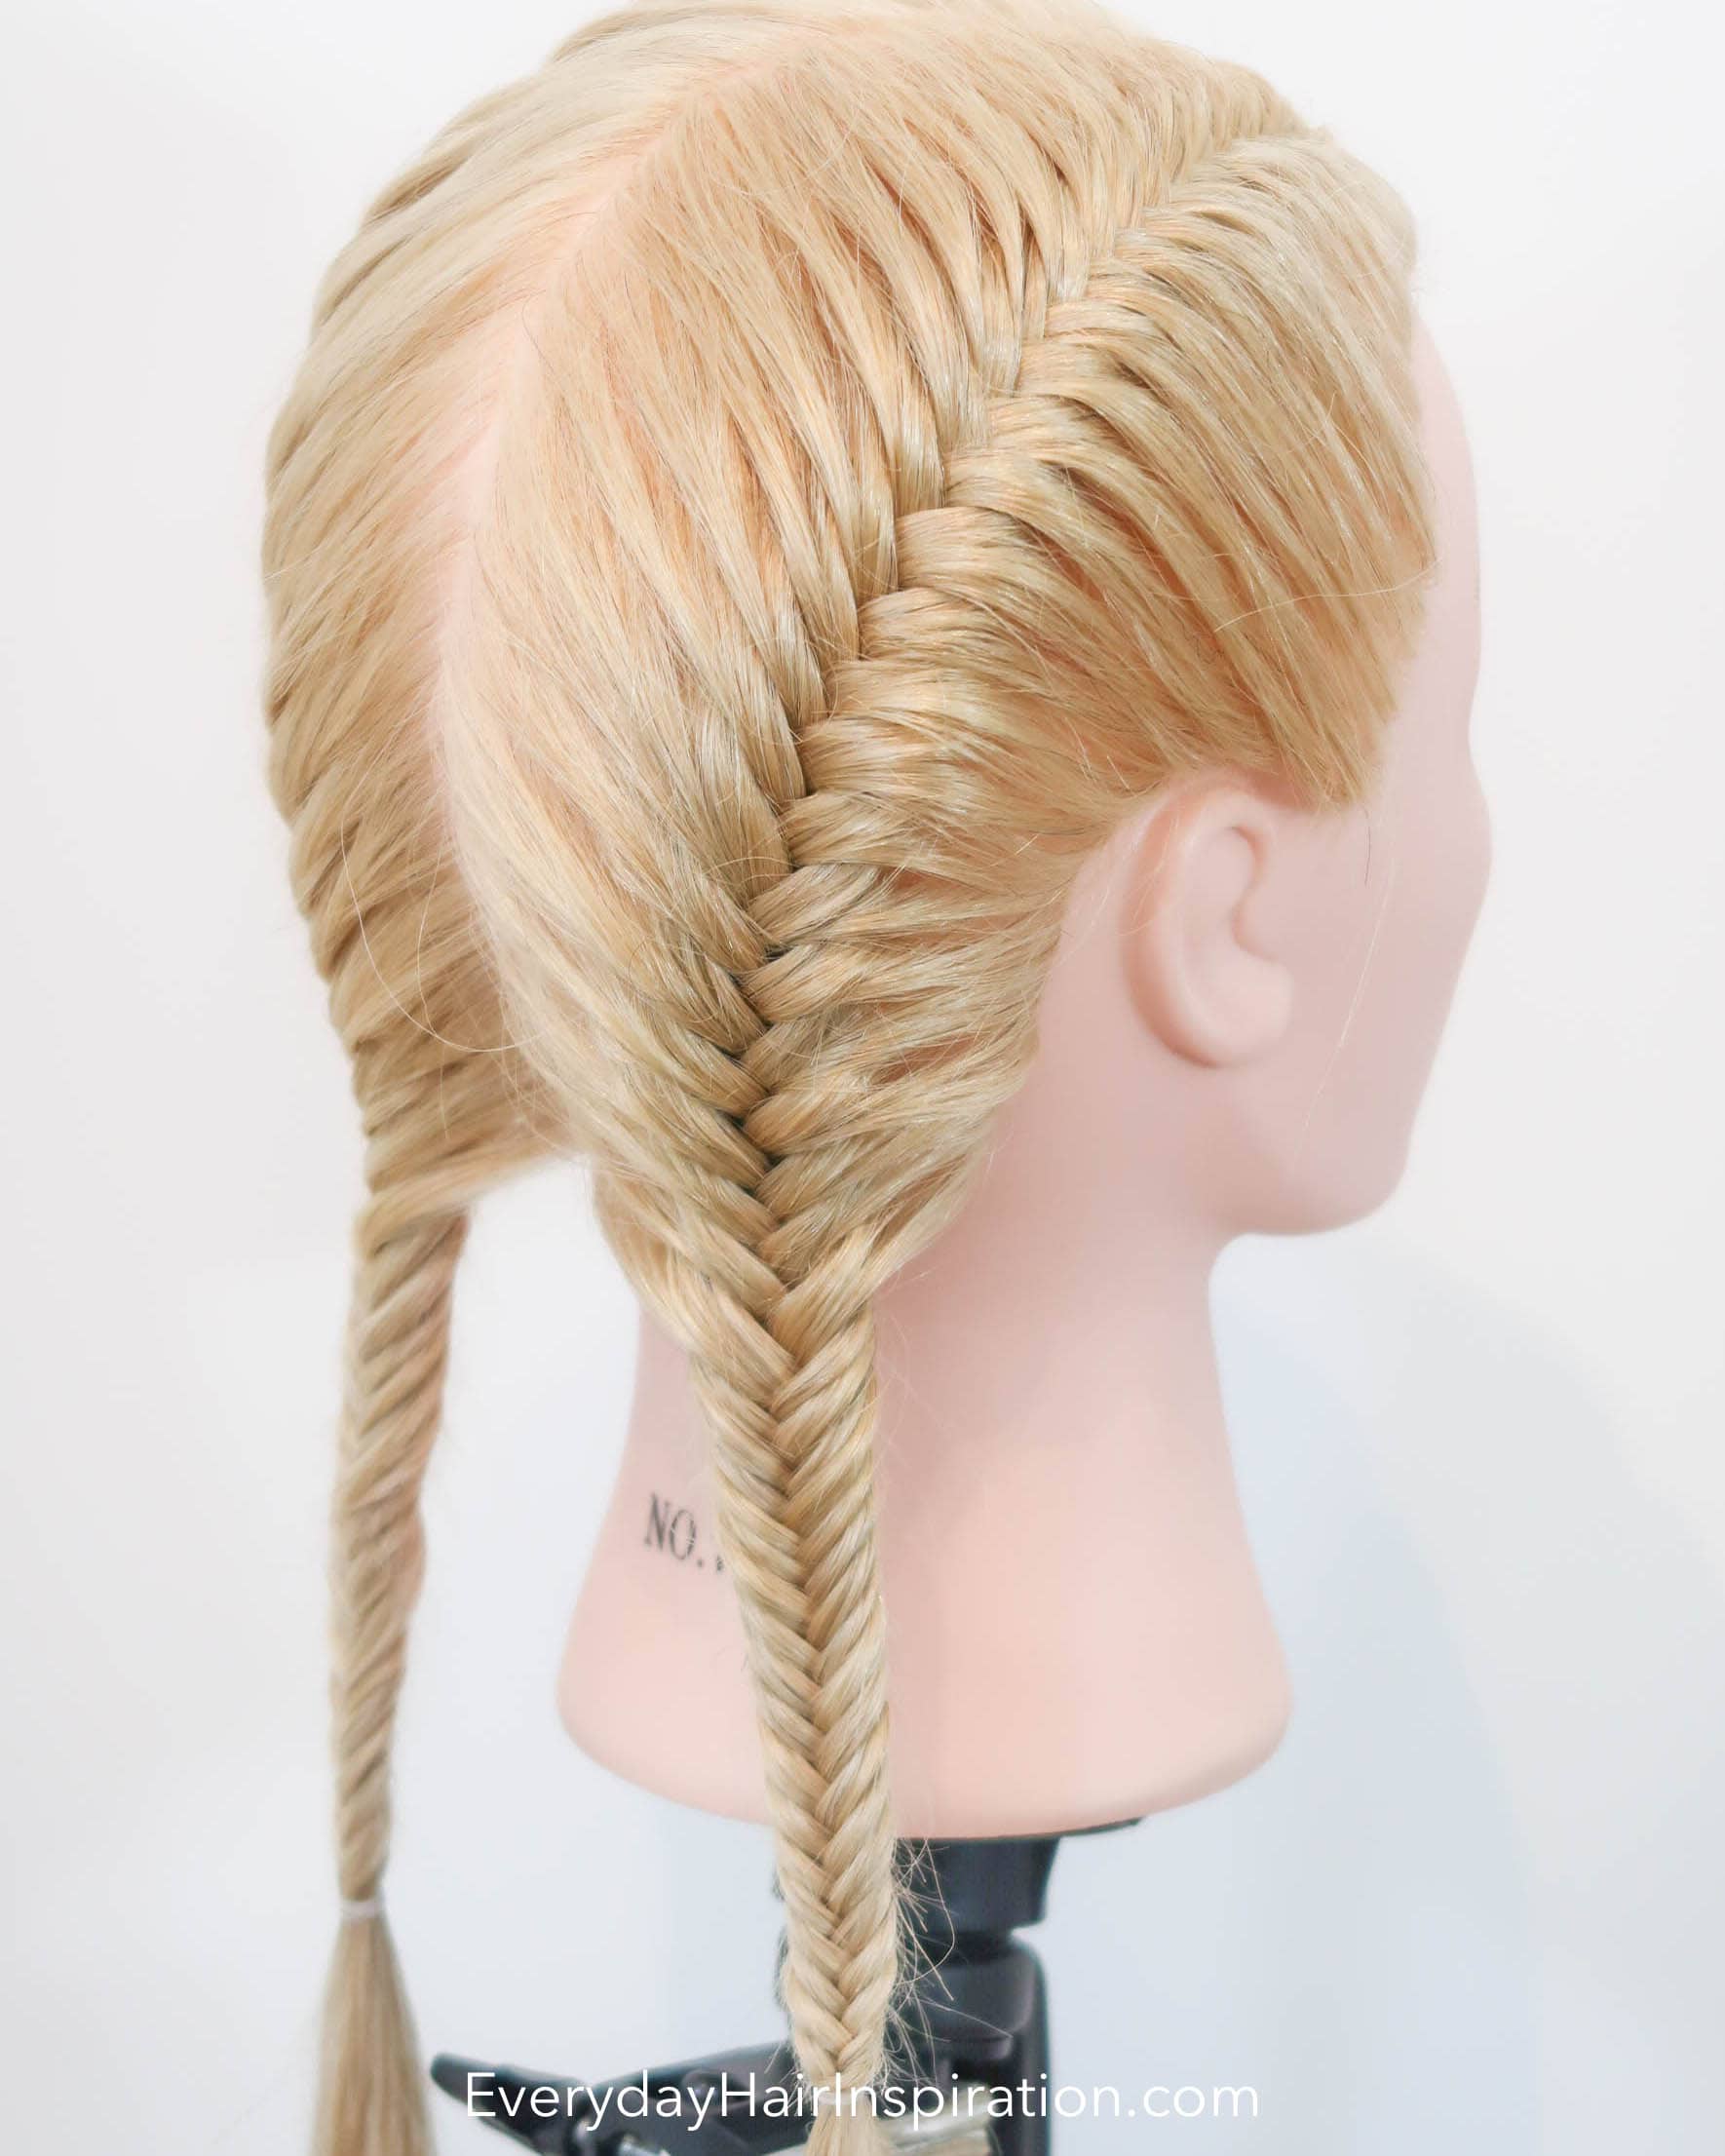 How to DIY Elegant Braided Fishtail Hairstyle